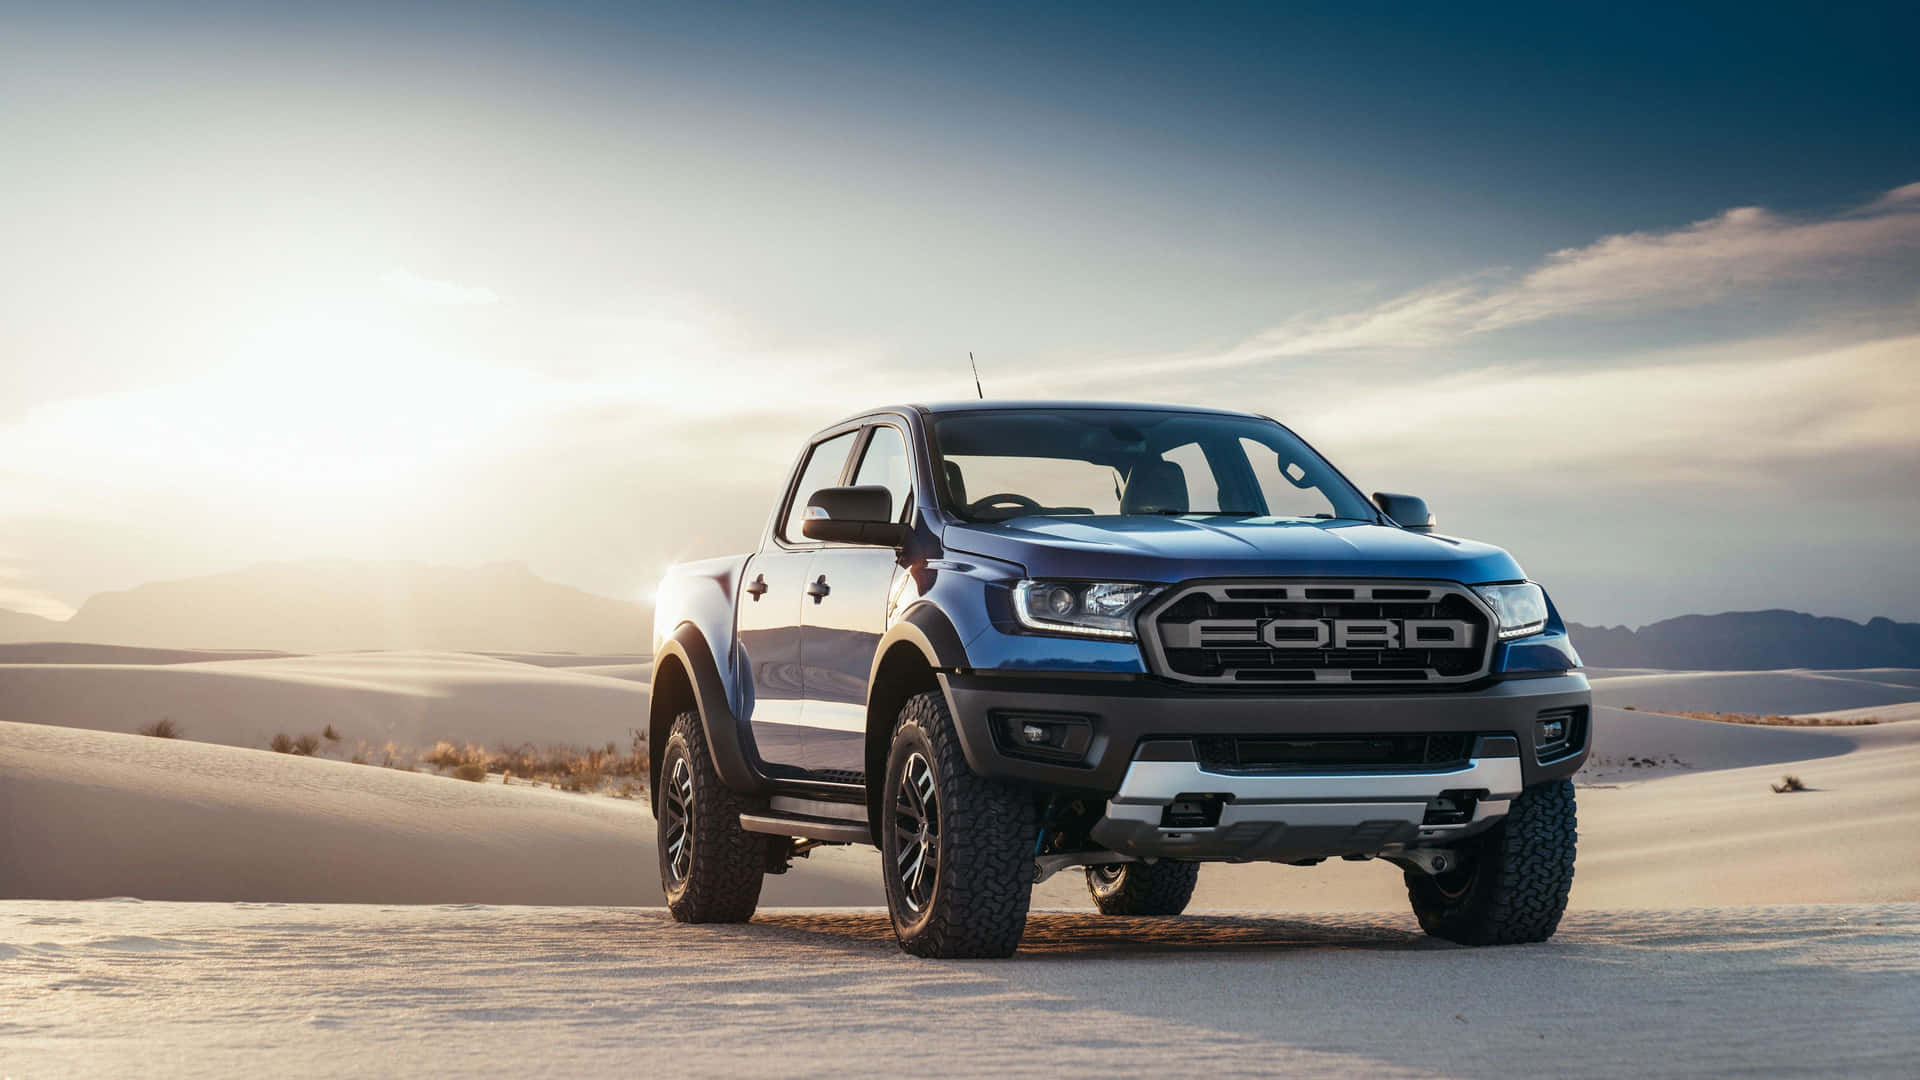 Get Ready to Explore in a Stylish Pick-Up Truck